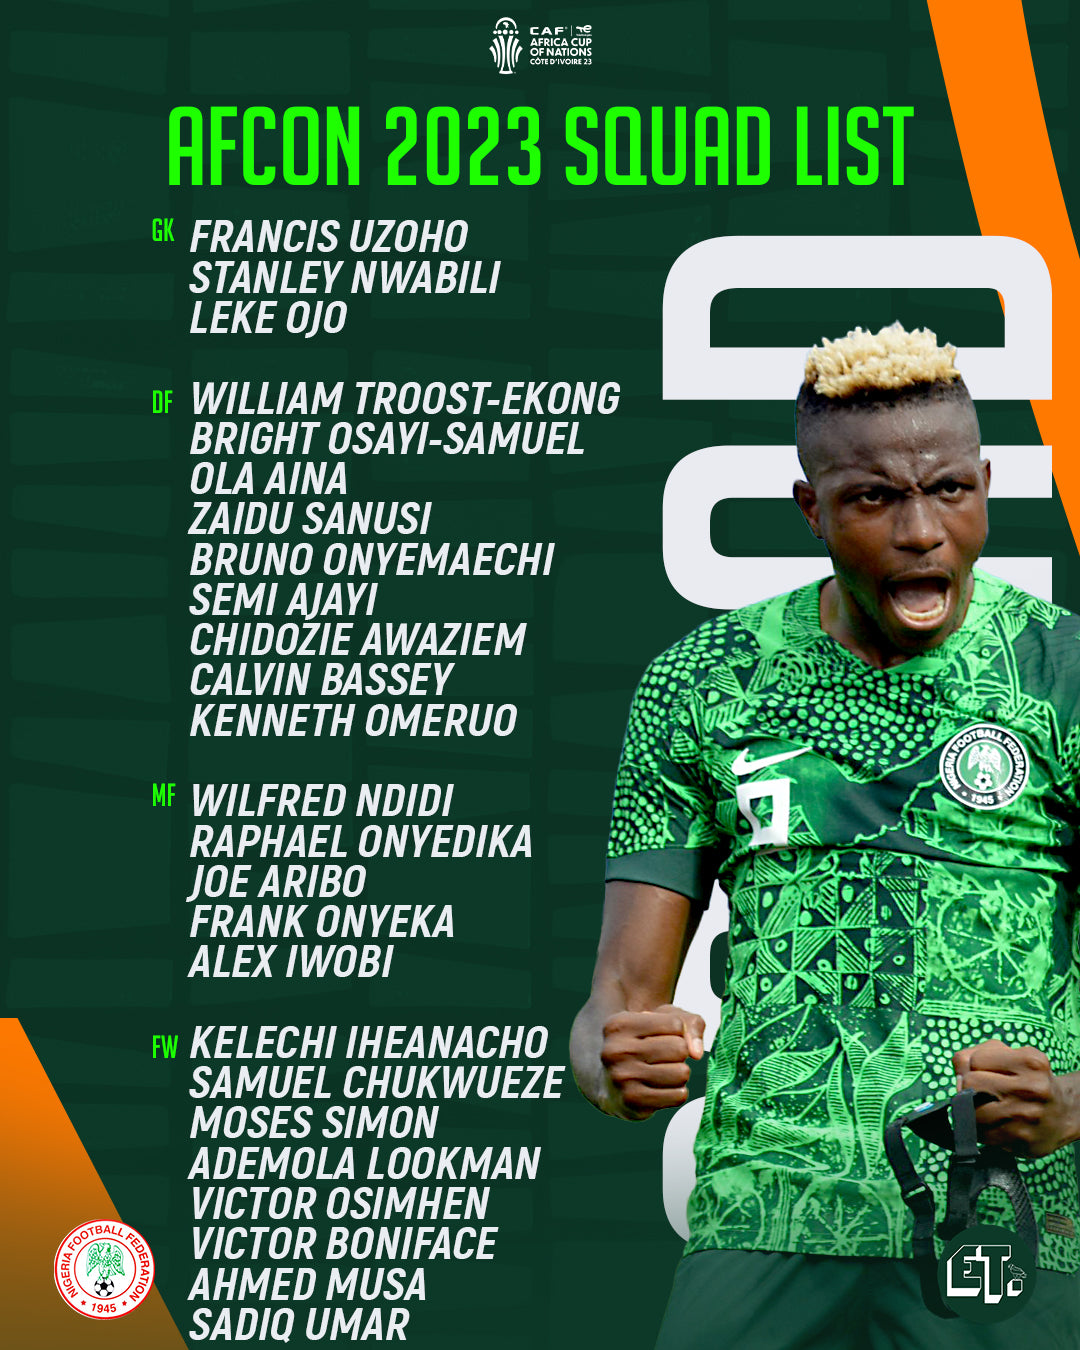 OFFICIAL: Osimhen, Musa, headline Nigeria's 25-man squad for AFCON 2023